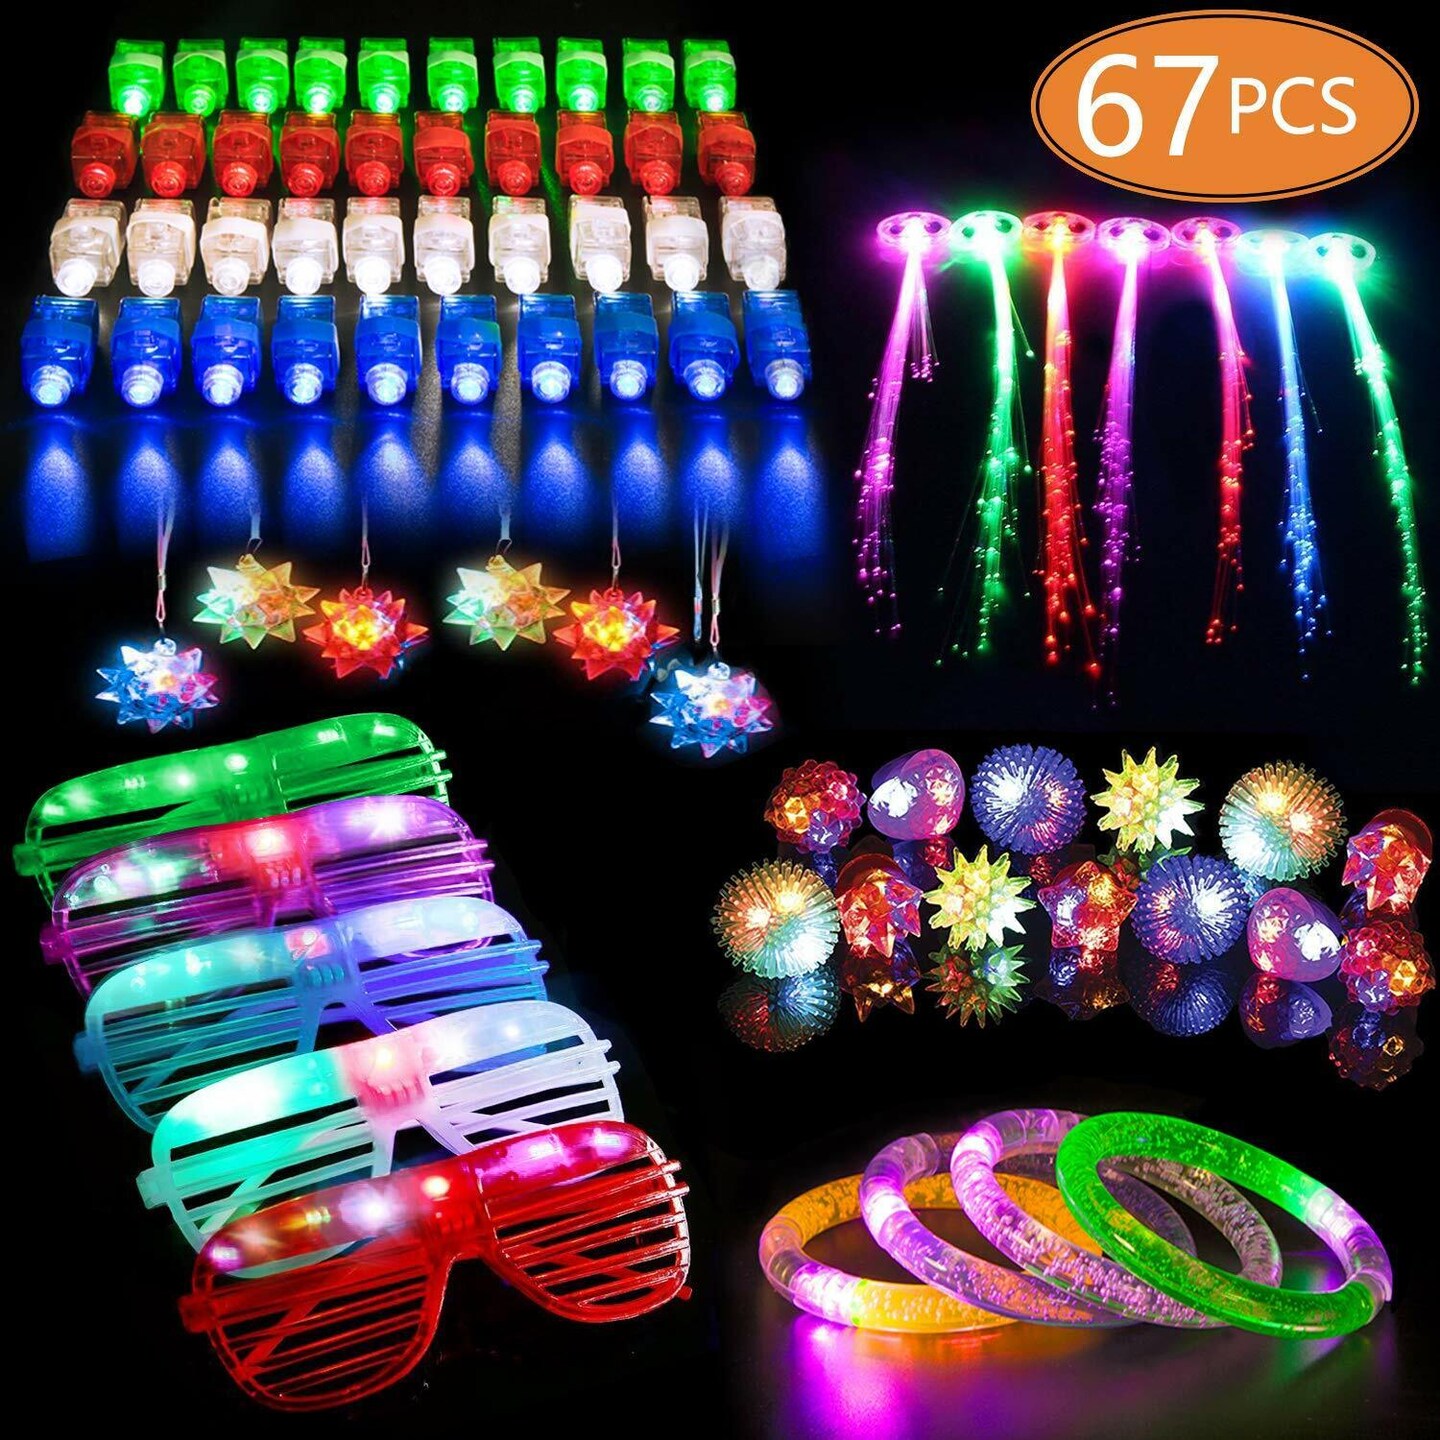 Glow in the Dark LED Party Toys 67 pcs